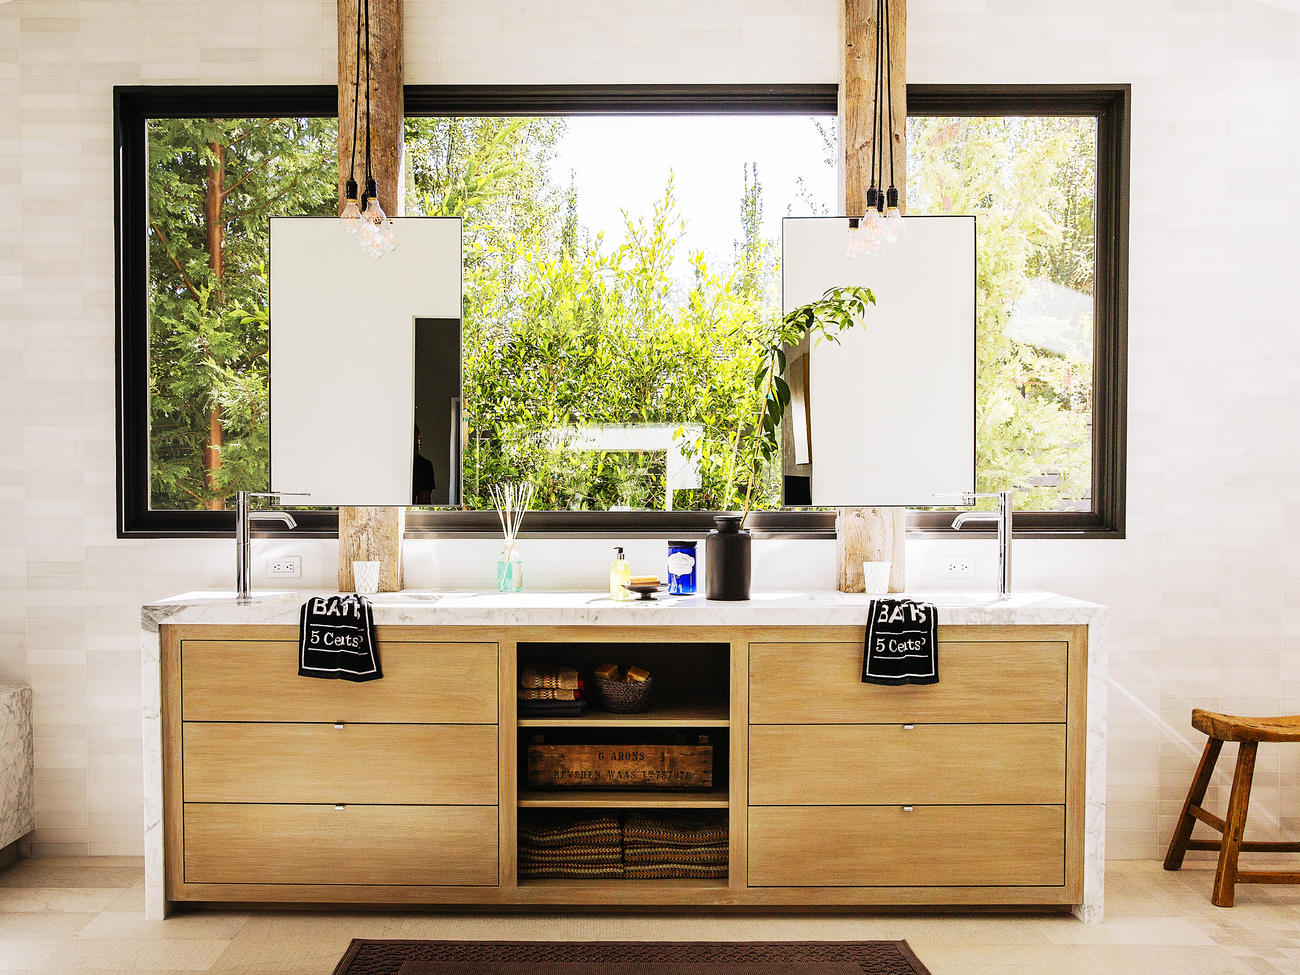 18 Ideas to Steal from a Rustic-Modern Ranch House